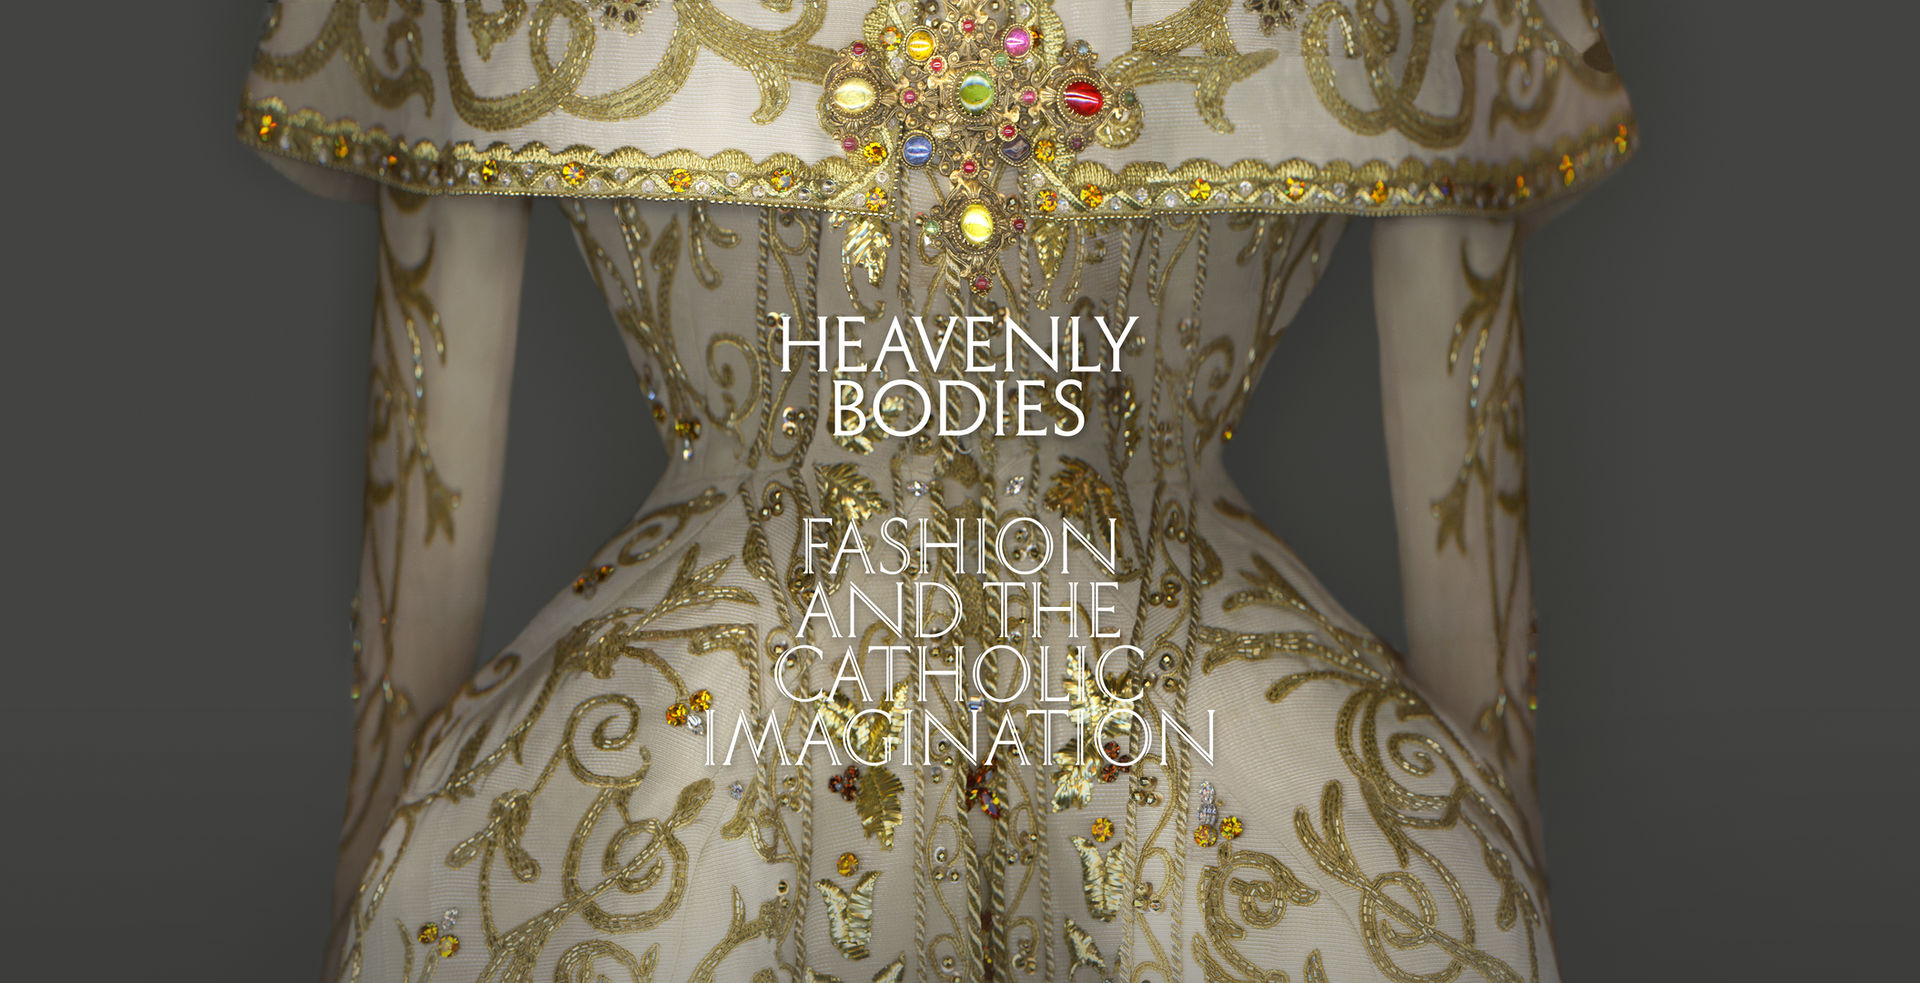 heavenly bodies meaning